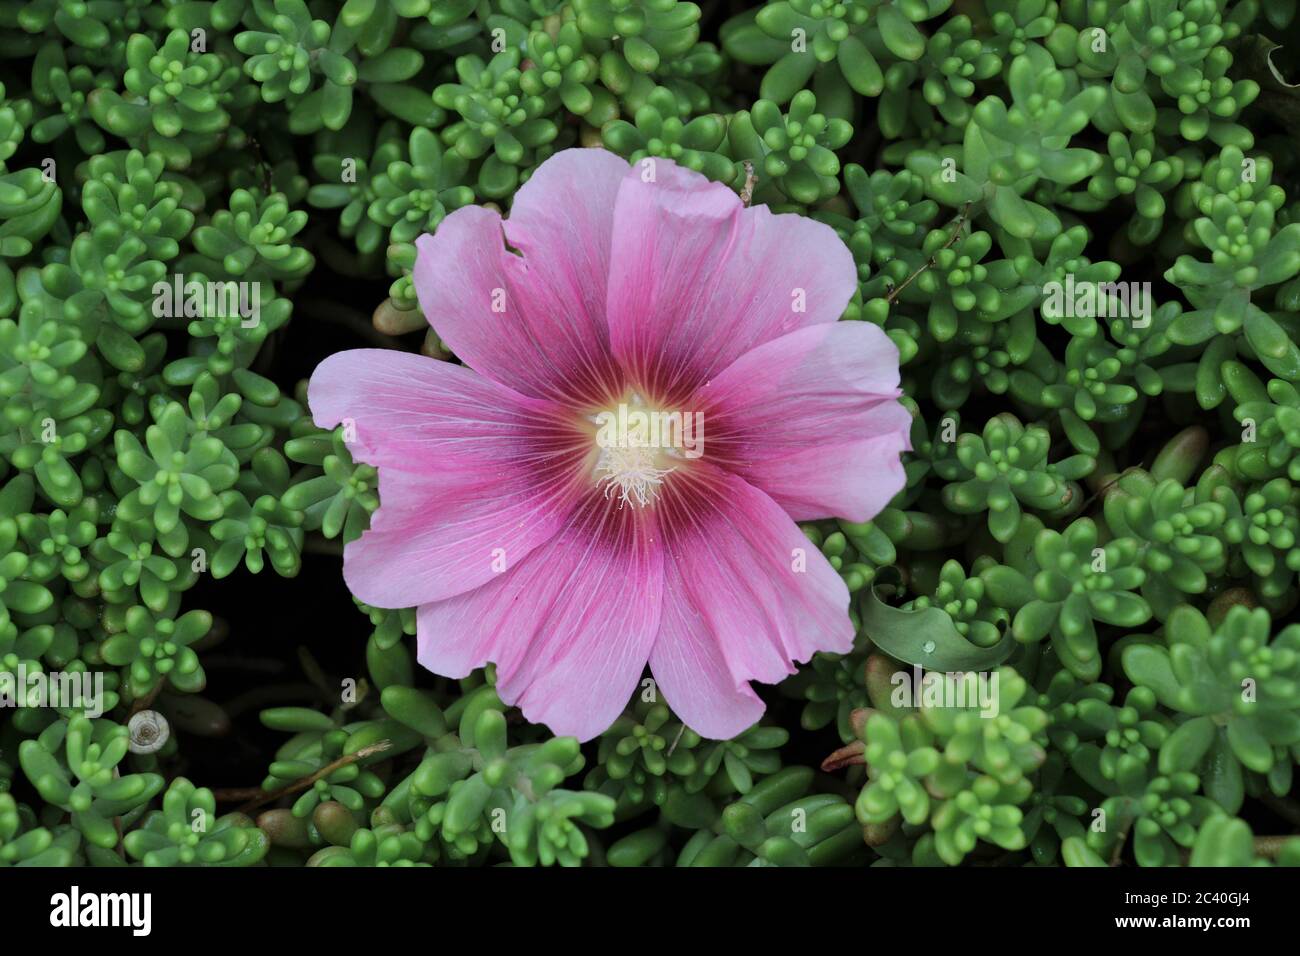 Marshmallow flower (Althaea officinalis) is a useful plant for human health. Photo of medicinal plants and marshmallow flowers. Stock Photo